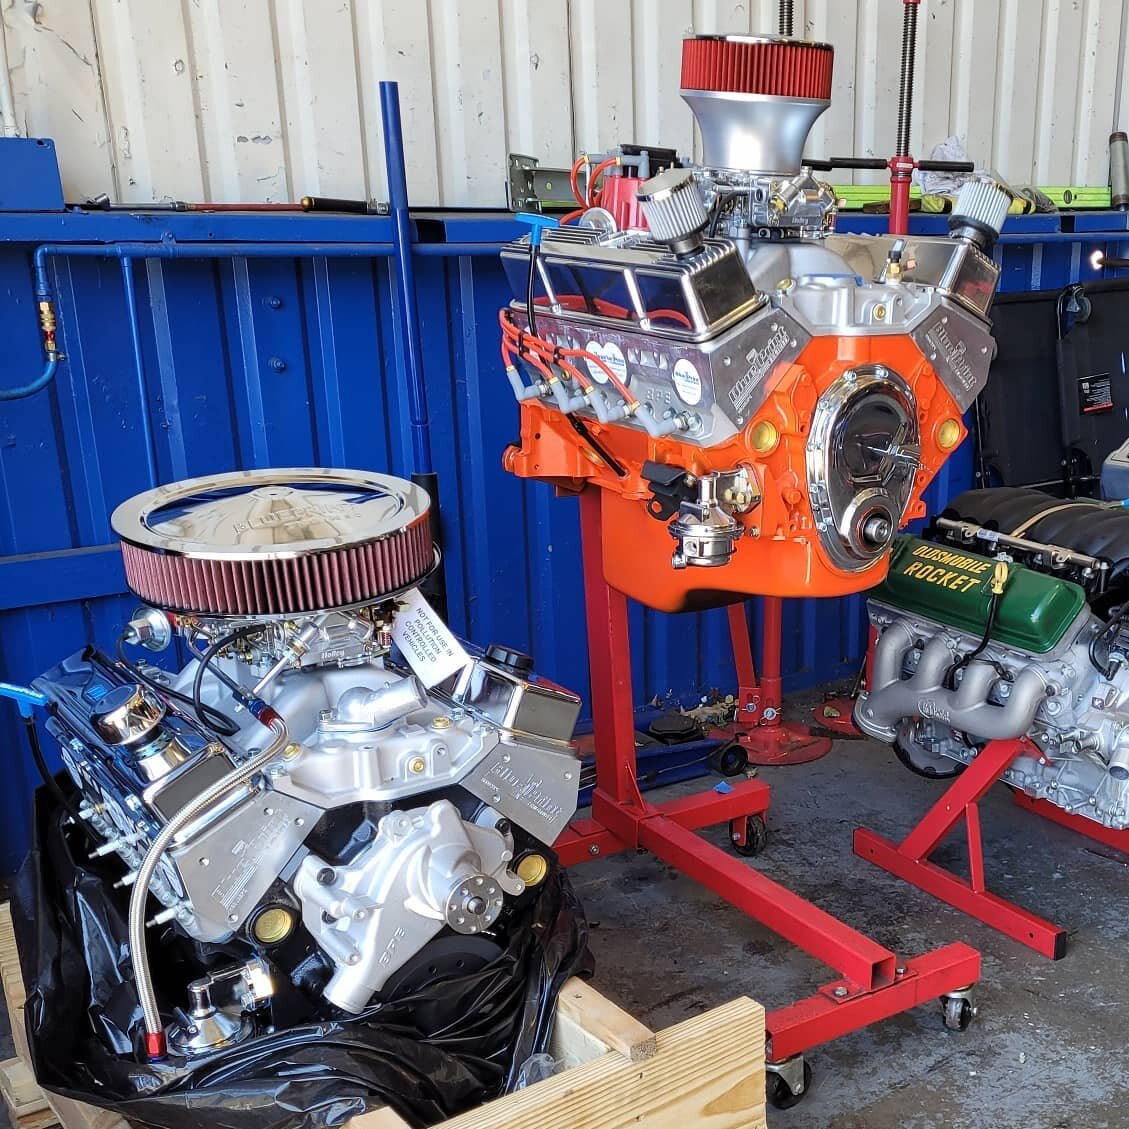 What's better than one brand new @blueprint_engines 383 sbc stroker? How about another 383 stroker with M/T valve covers in full 70's pro-street spec! Oh and a 13:1 #clevelor Ford race engine and a backdated LS3 doesn't hurt 😉 hit us up if you want 